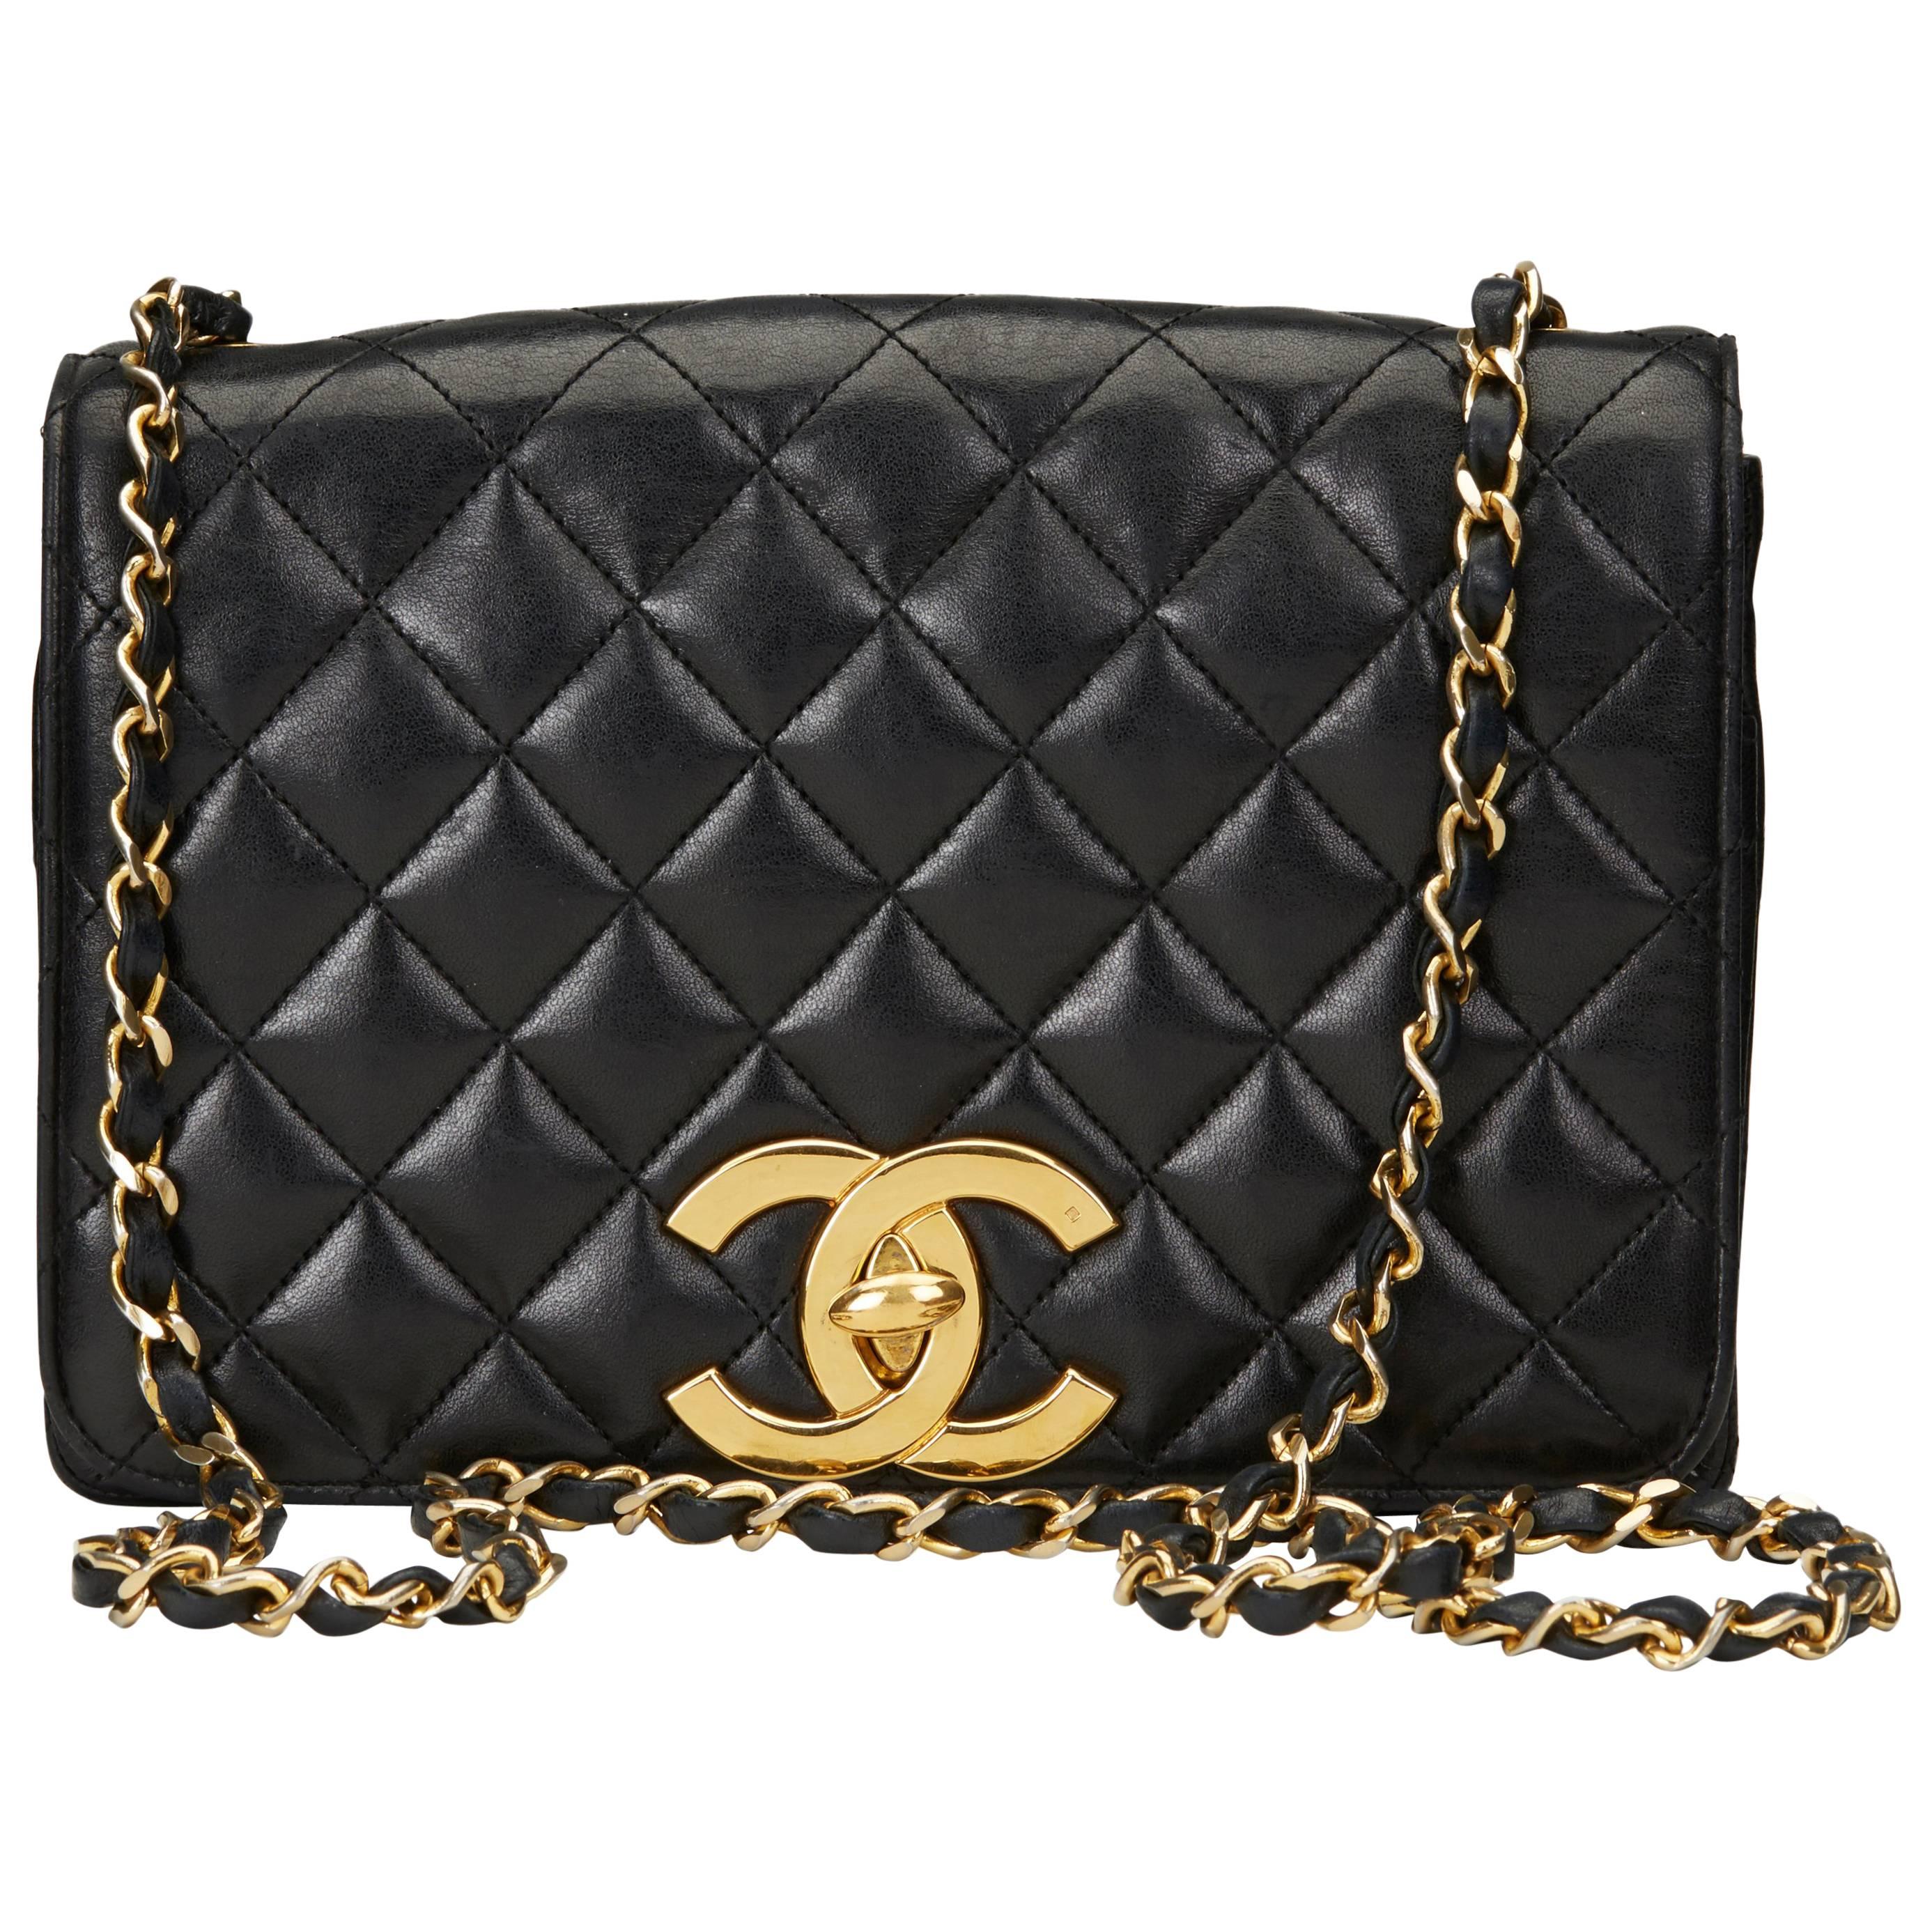 1980s Chanel Black Quilted Lambskin Vintage Classic Single Flap